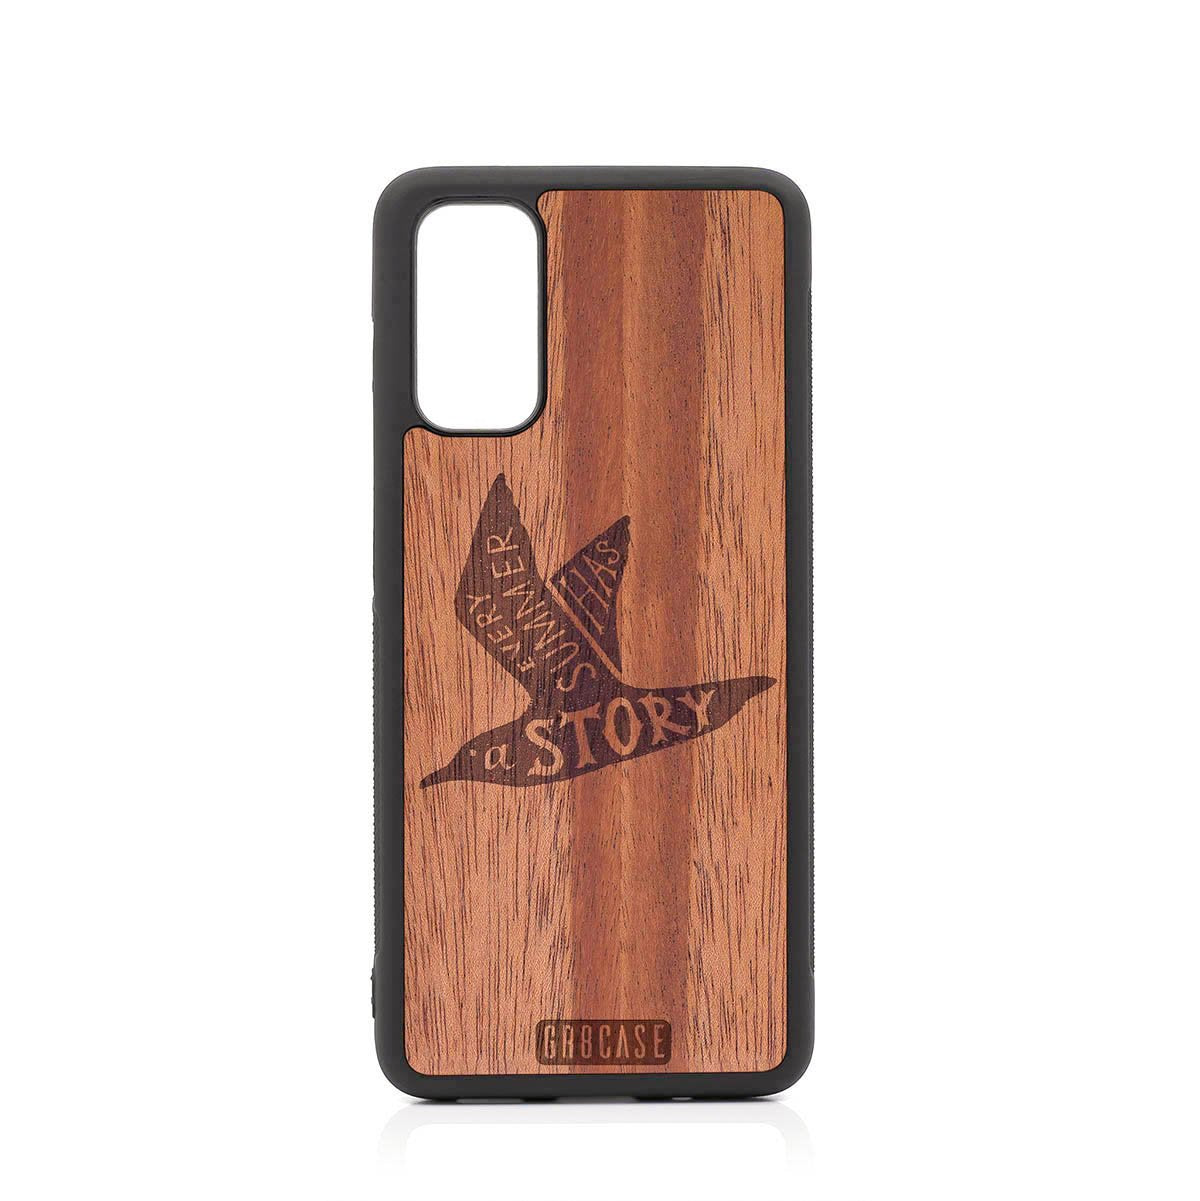 Every Summer Has A Story (Seagull) Design Wood Case For Samsung Galaxy S20 FE 5G